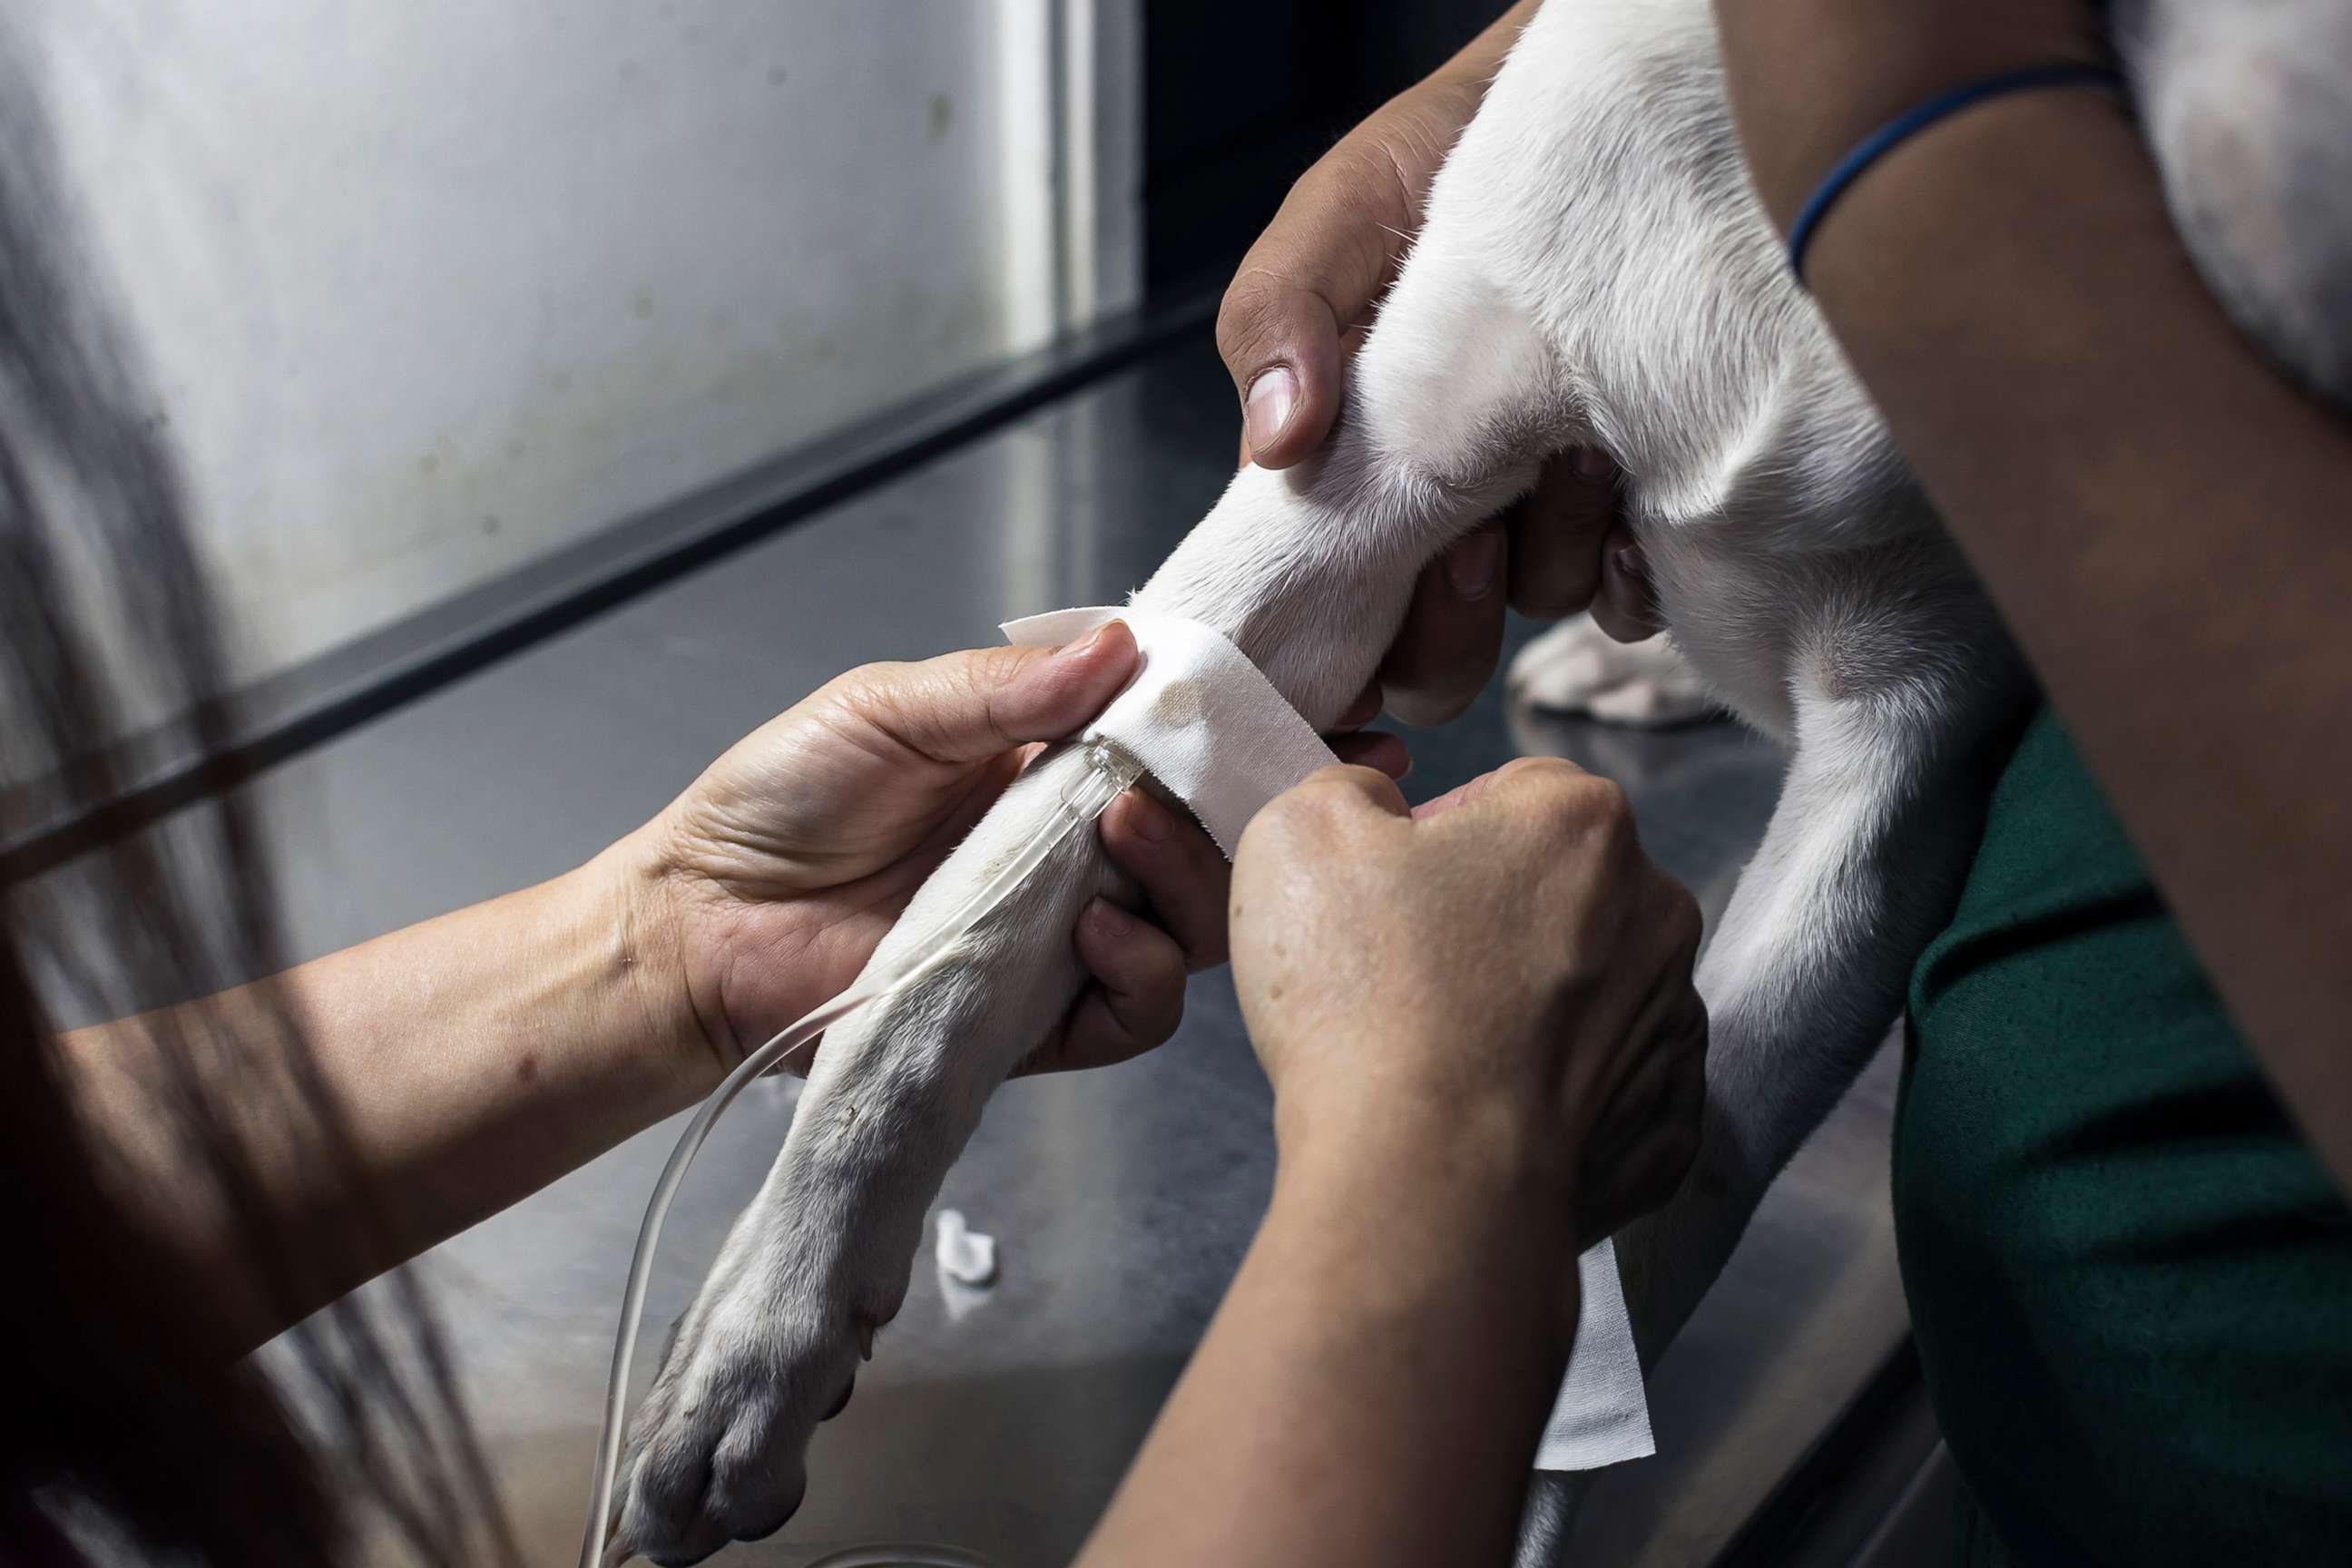 PHOTO: A veterinarian secures an IV drip line on a sick puppy's leg with an adhesive bandage, in a stock photo.